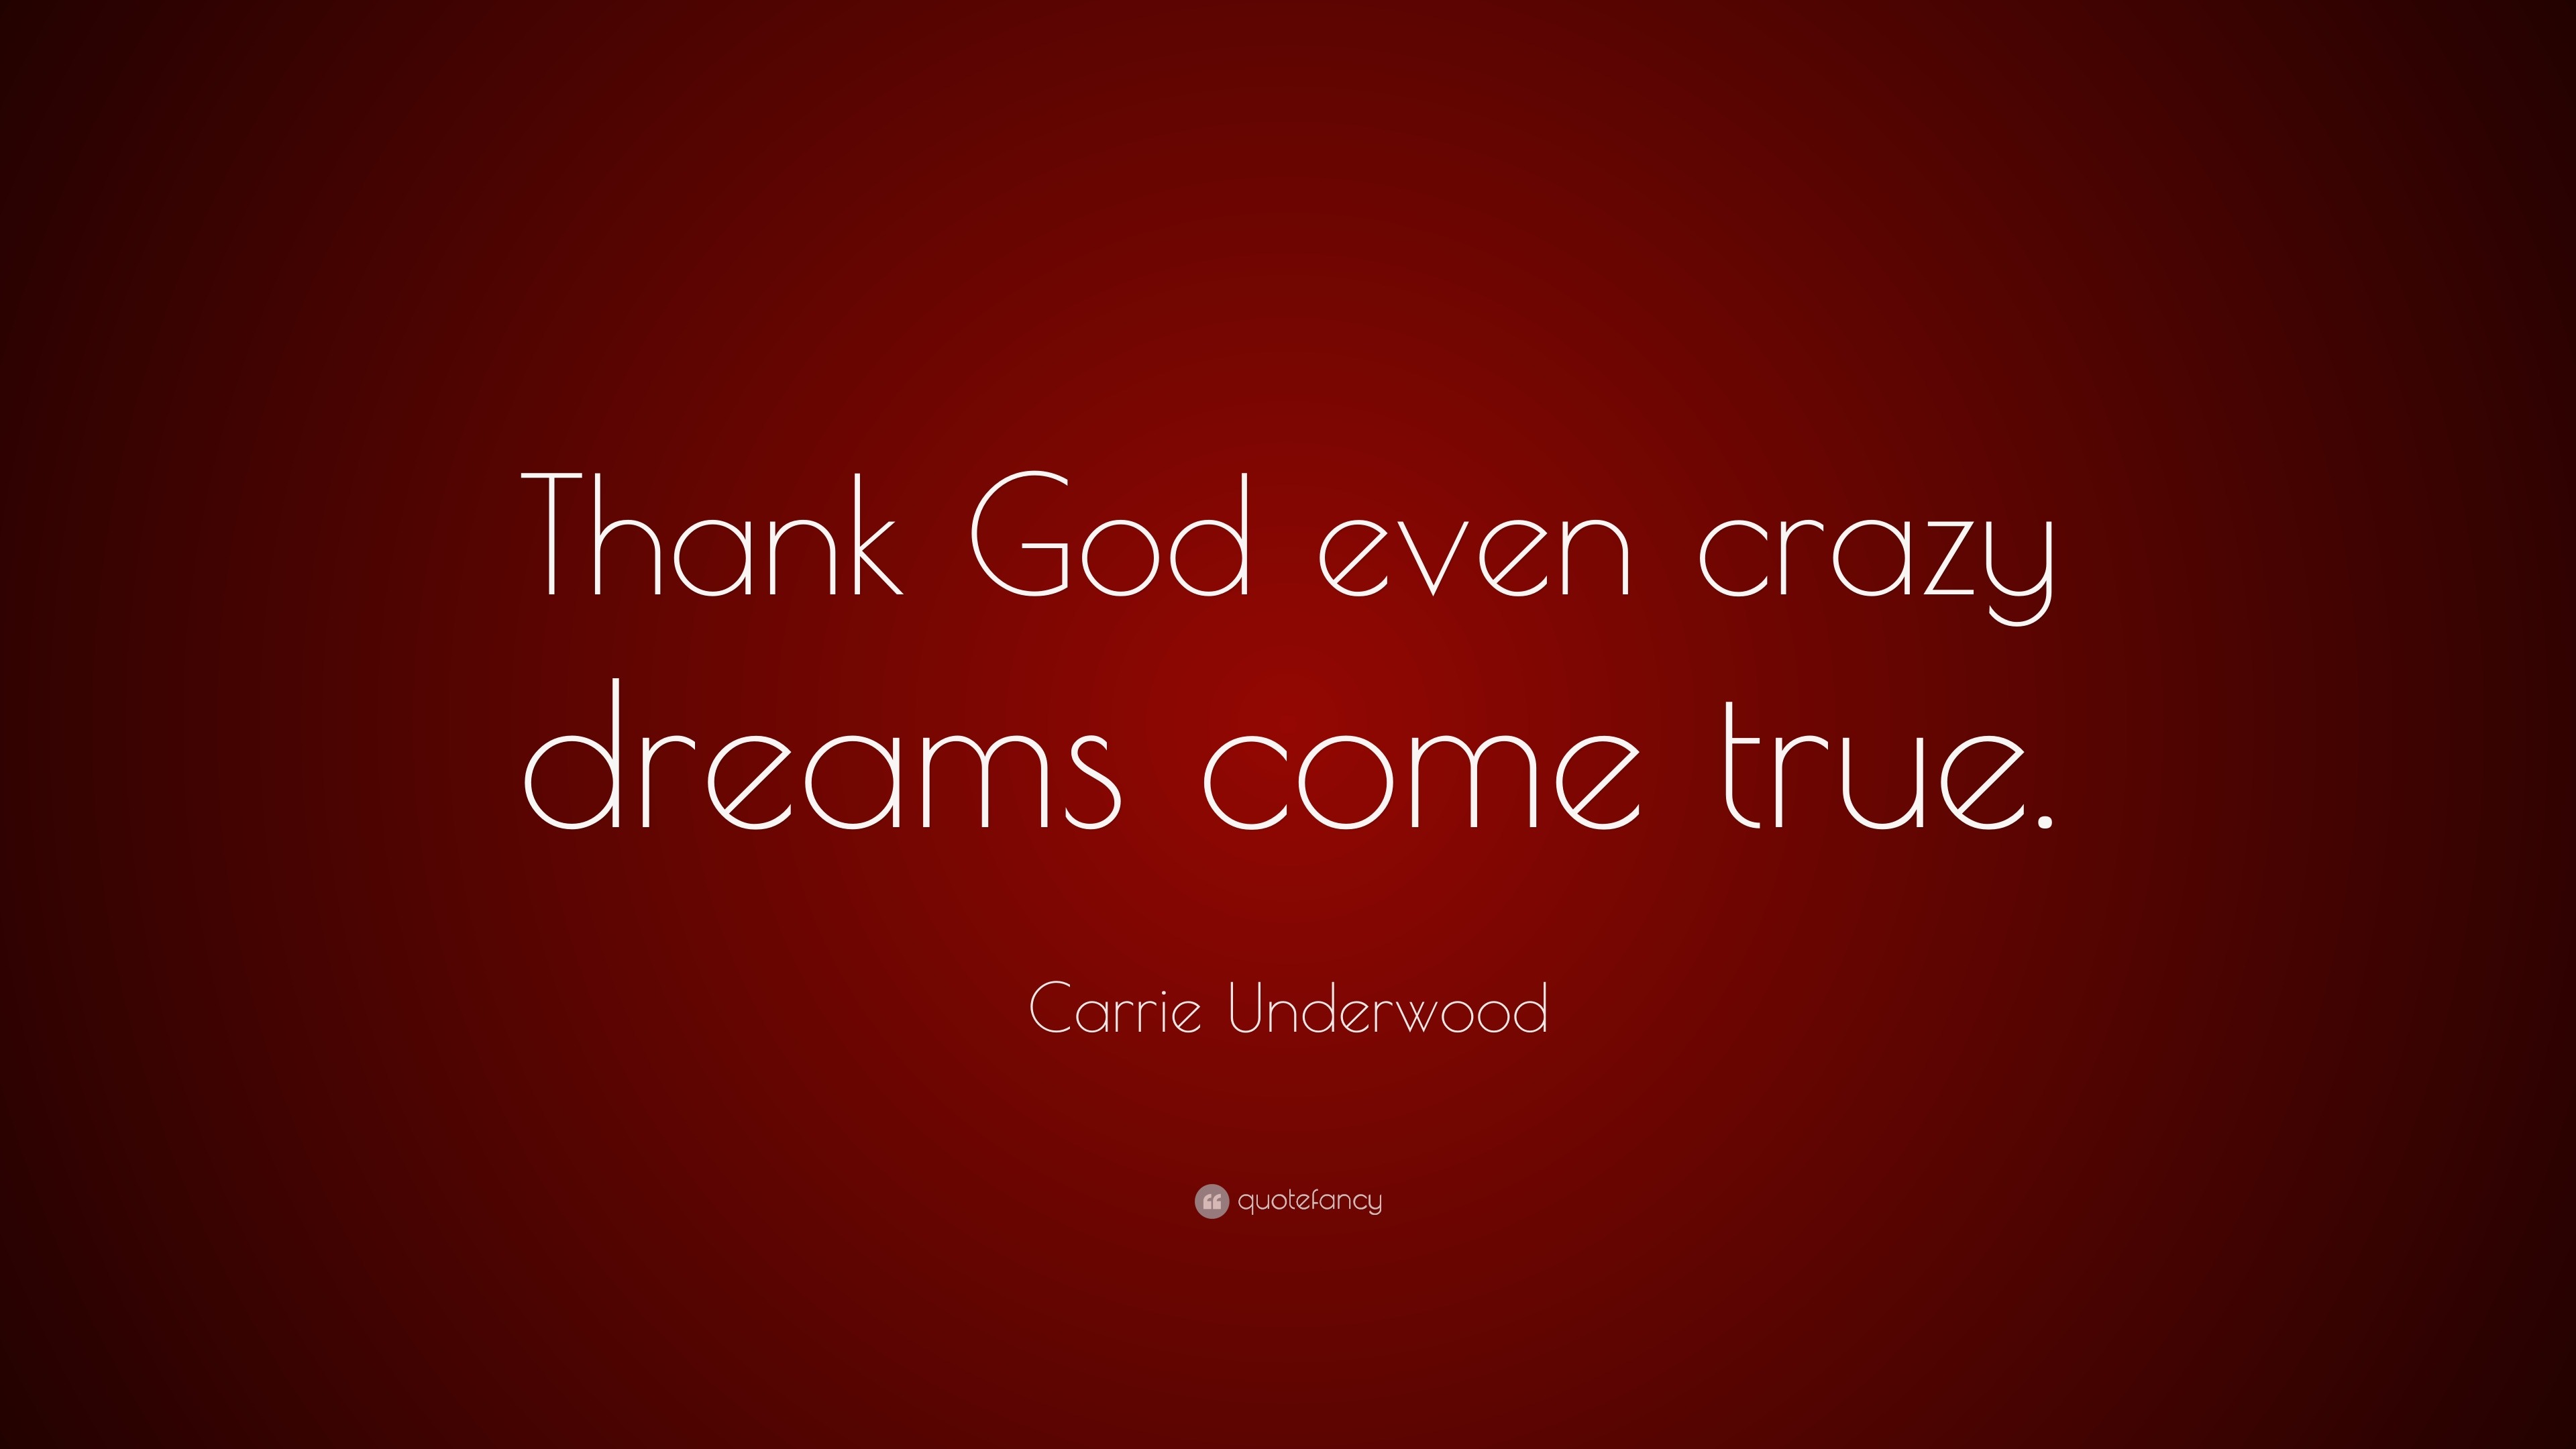 Carrie Underwood Quote “Thank God even crazy dreams e true ”